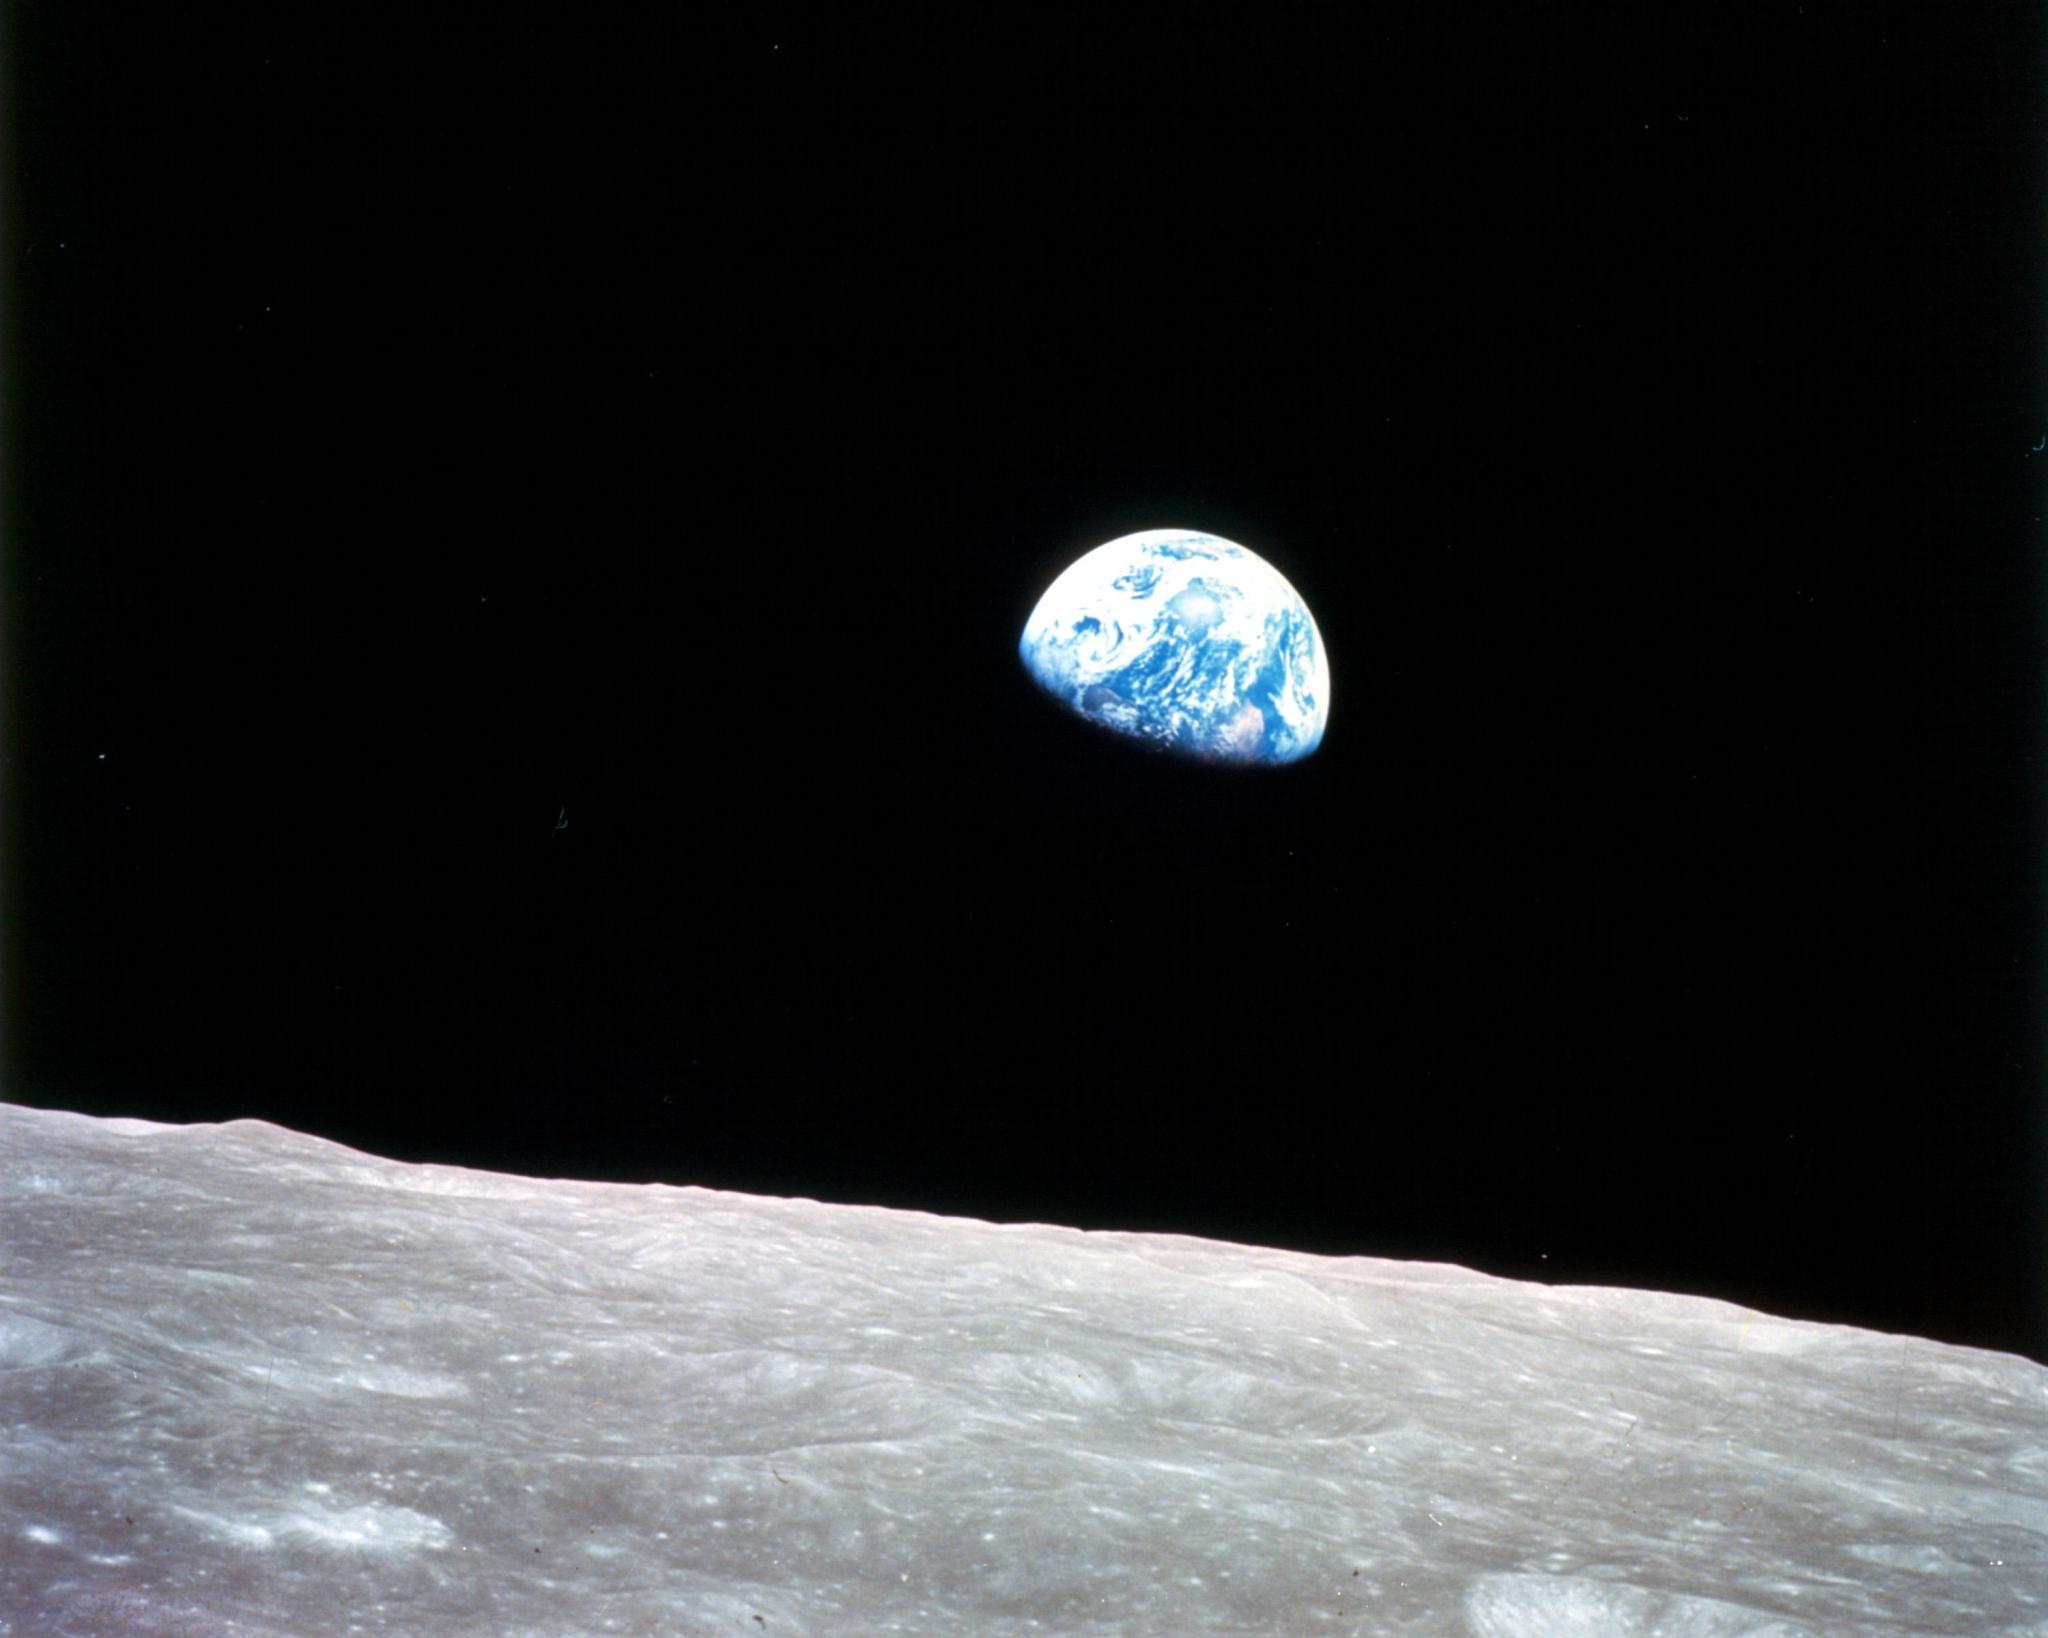 The iconic “Earthrise” image of Earth appearing over the Moon’s horizon as seen from the Apollo 8 spacecraft, taken during a live broadcast with NASA astronauts from the lunar orbit on Christmas Eve, Dec. 24, 1968.